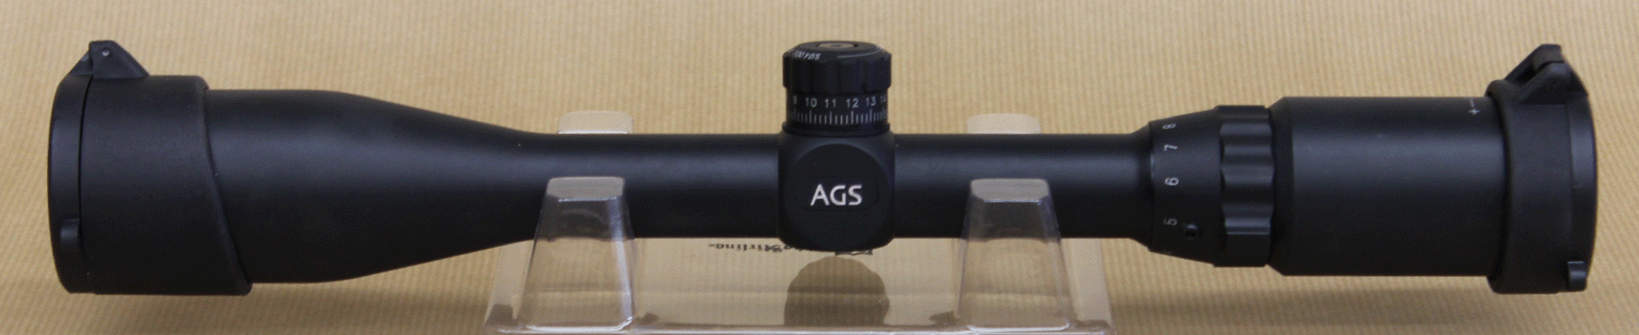 AGS3950